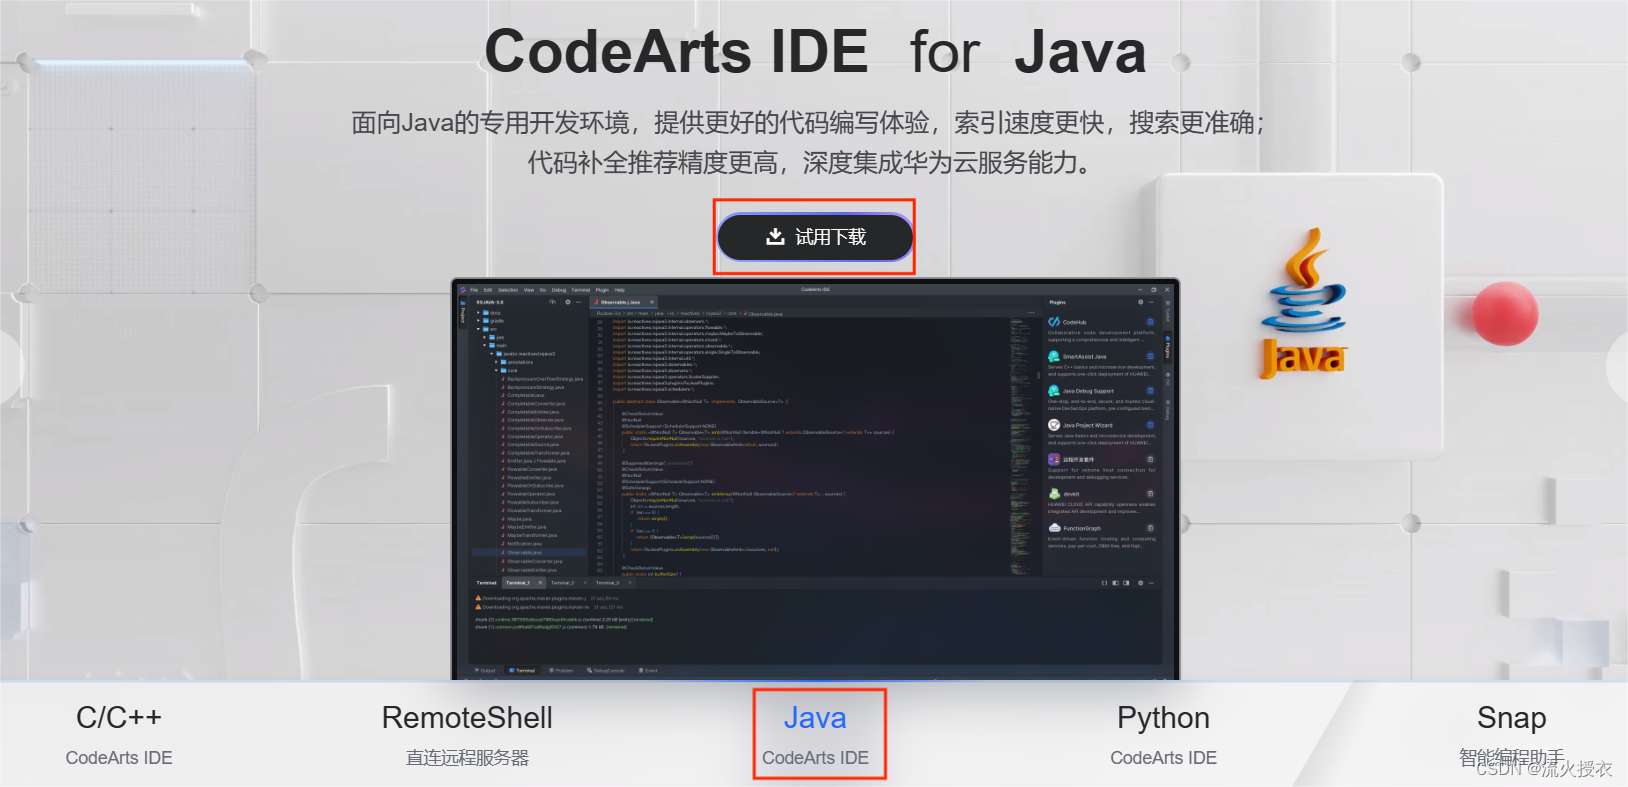 Java入门：1.1 编译器（CodeArts IDE for java）